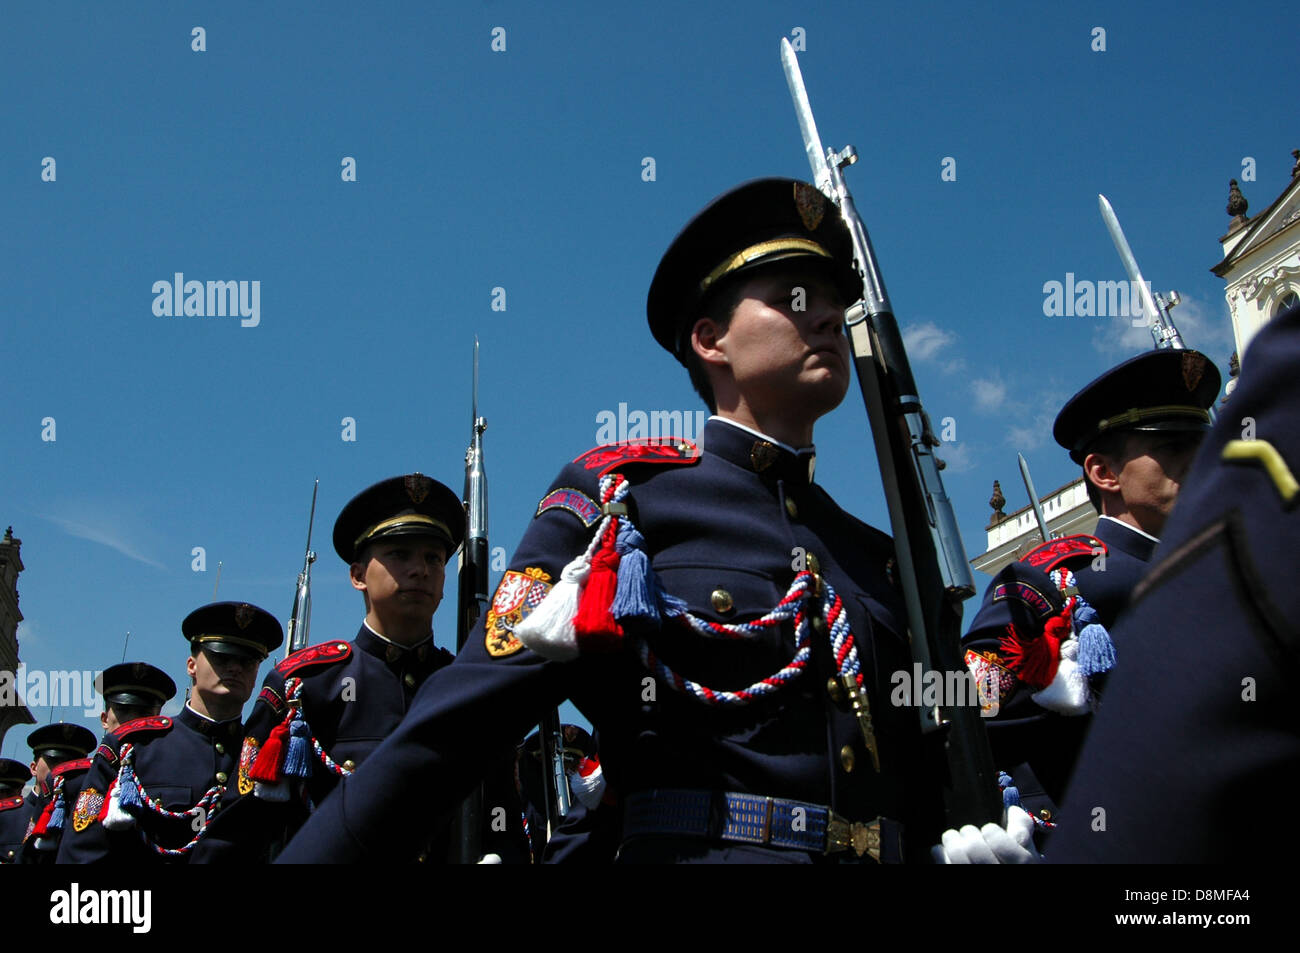 Armed members of the Castle Guard which task is to guard and defend the seat of the President of the Czech Republic at the Prague Castle, Czech republic Stock Photo